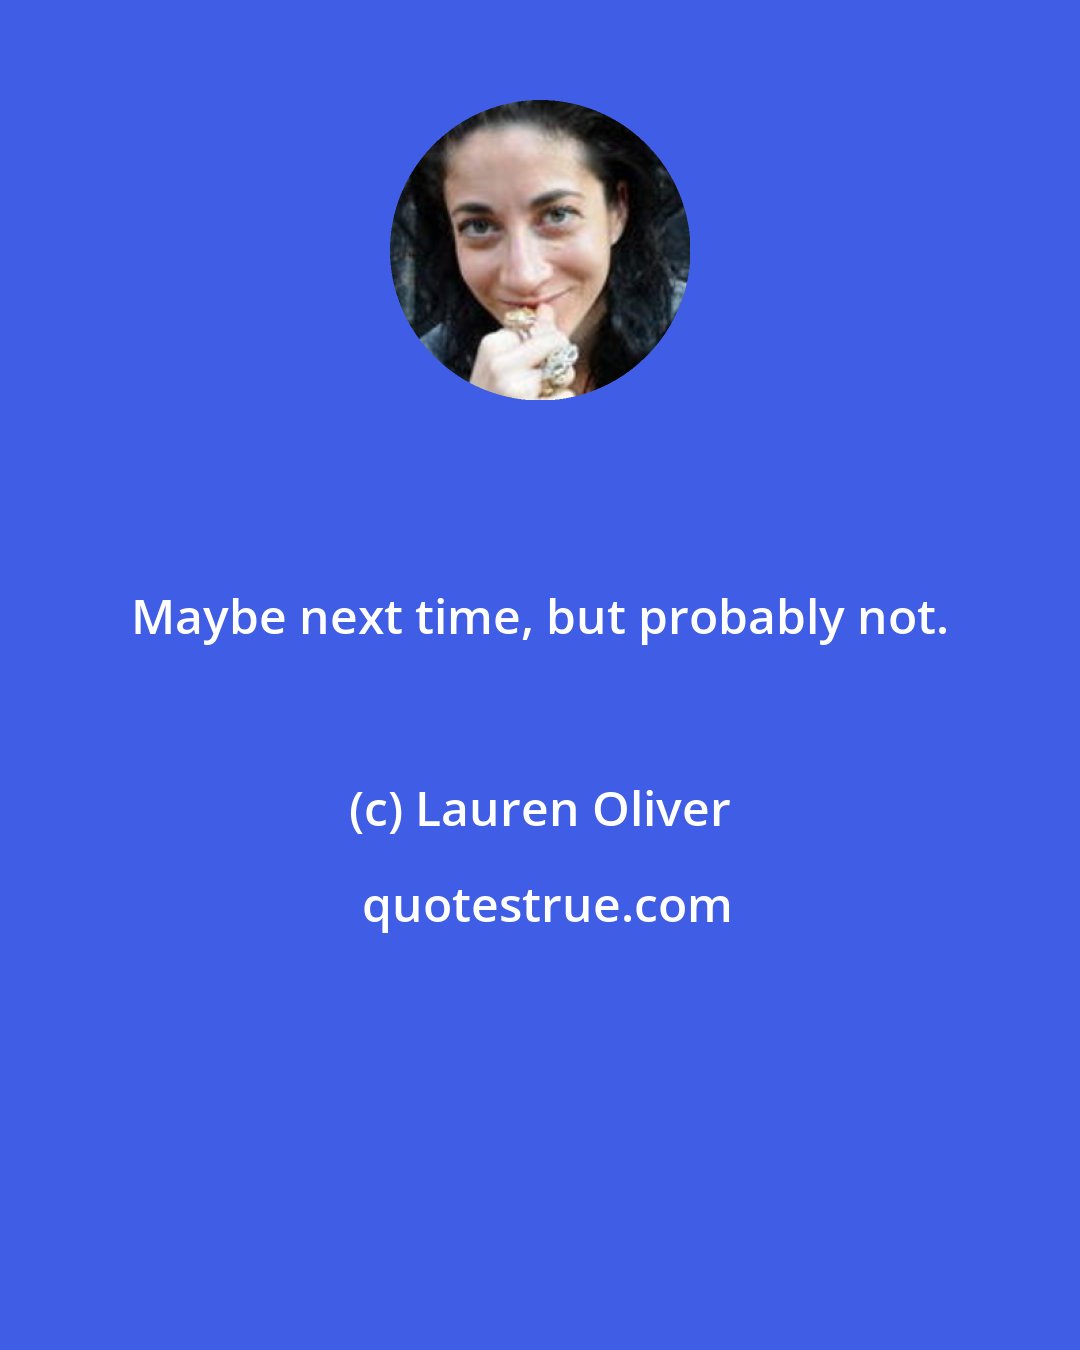 Lauren Oliver: Maybe next time, but probably not.